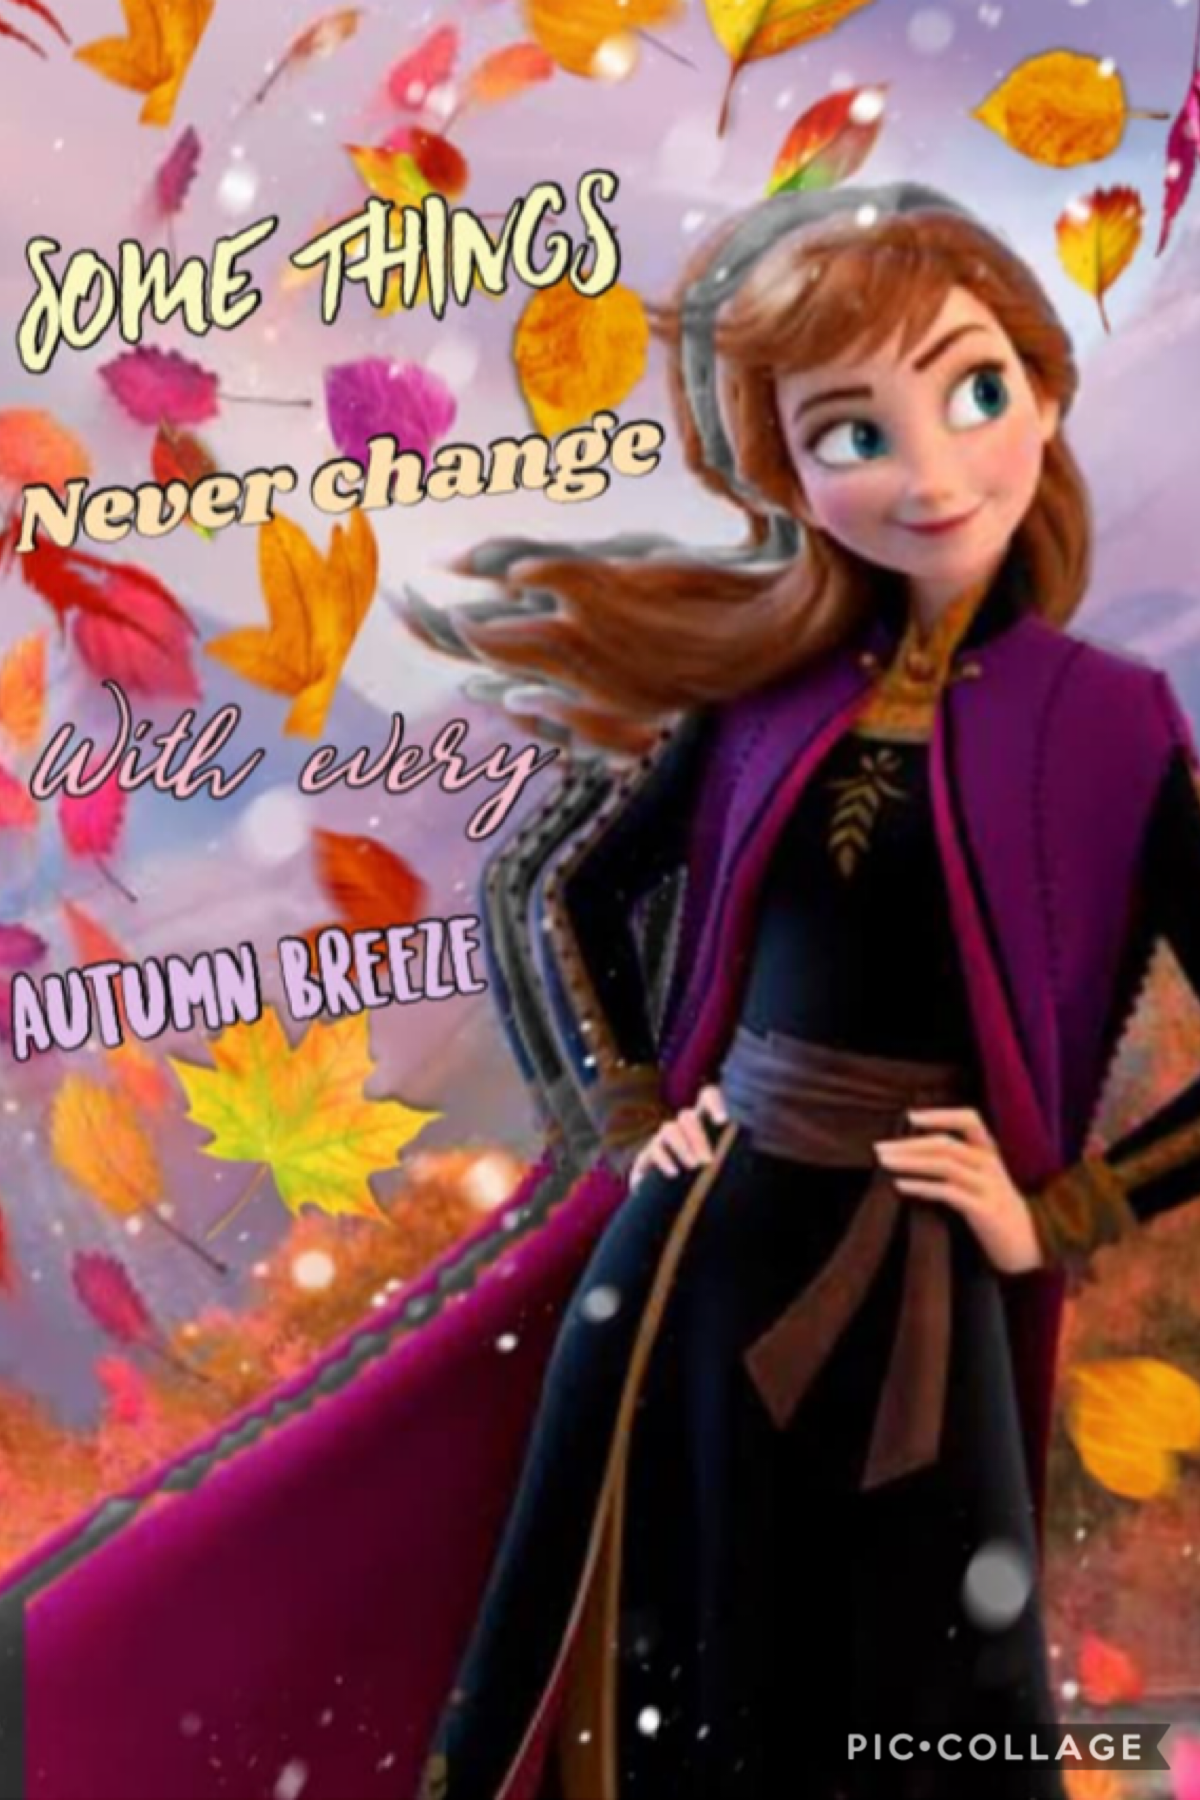 Anna frozen collage  collaboration with Gracie is here 